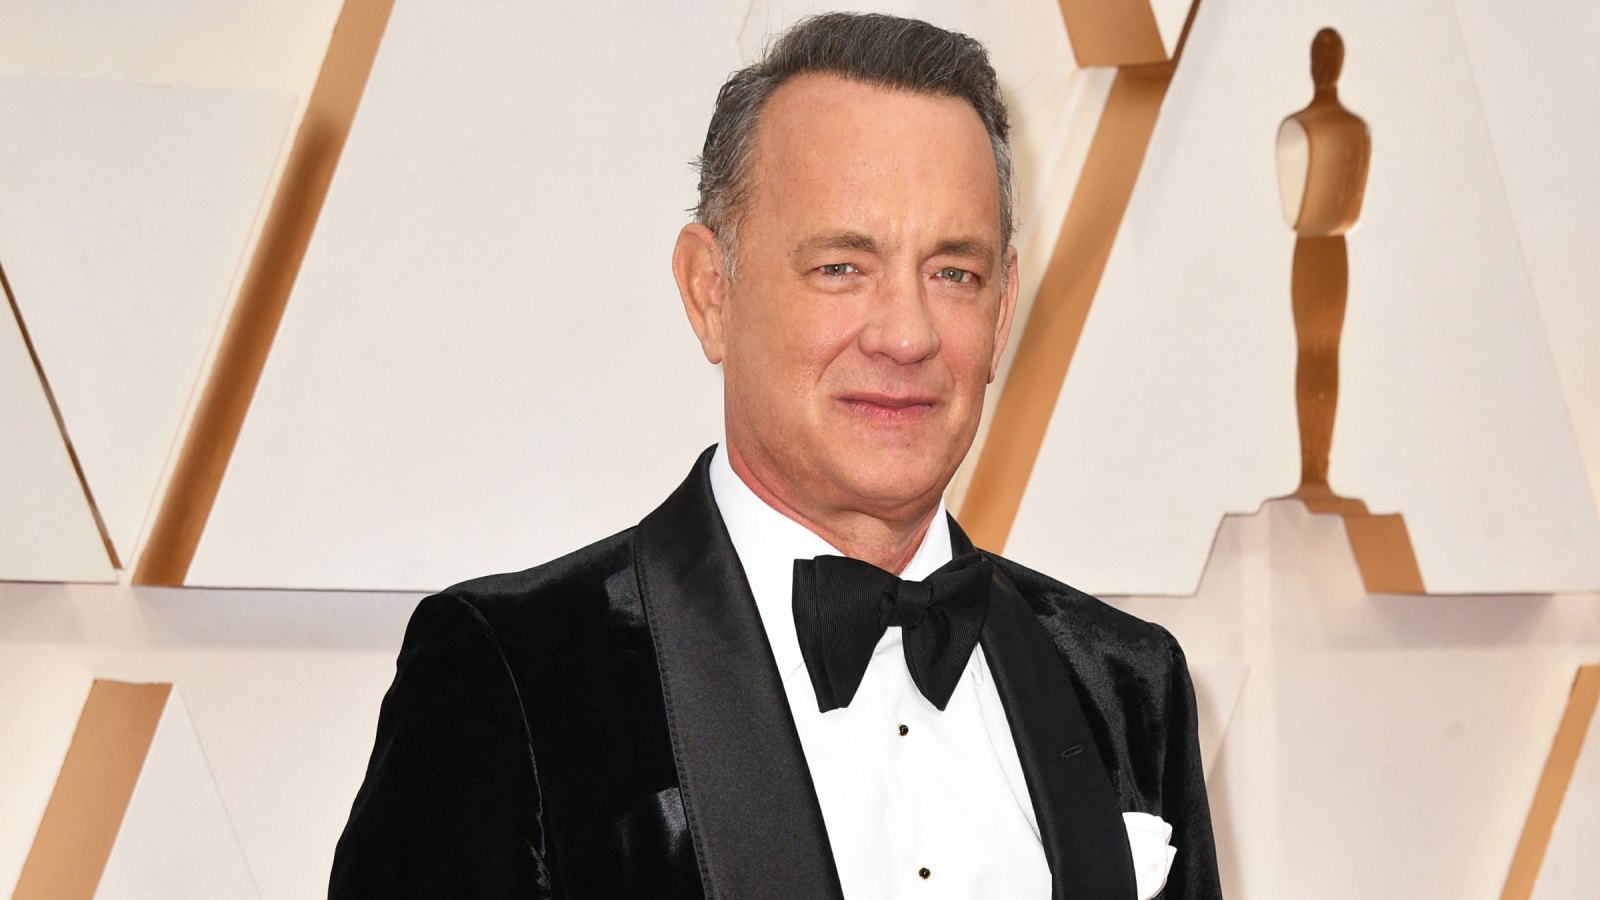 Tom Hanks Details Coronavirus Symptoms: I Was ‘Wiped Out’ After Exercising for 30 Minutes